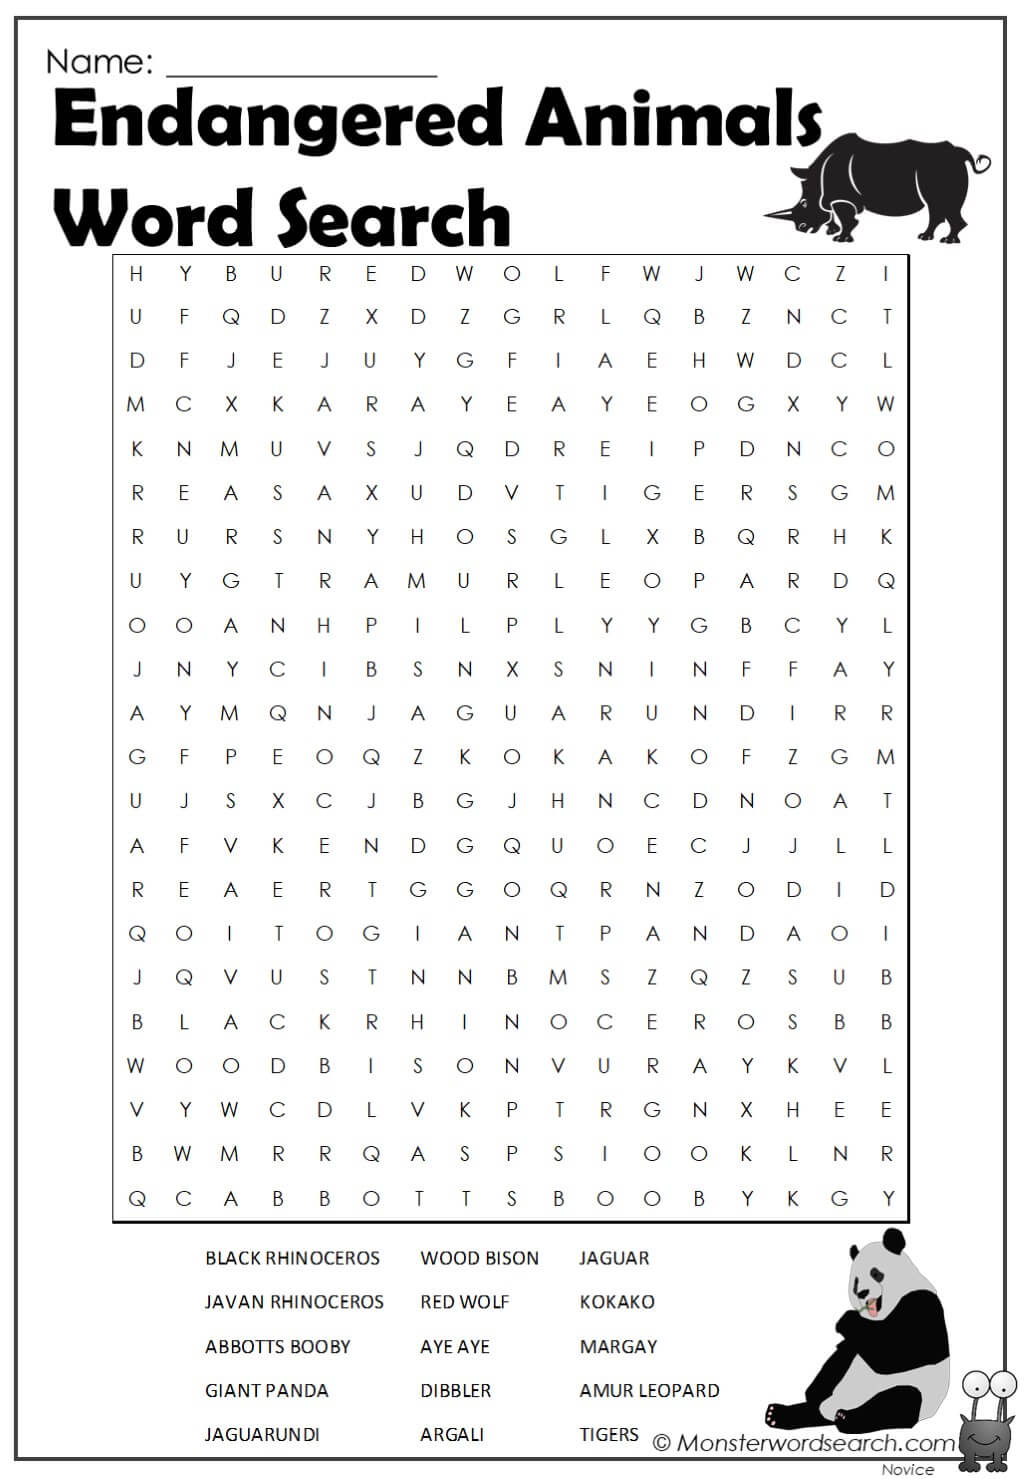 endangered-animals-word-search-monster-word-search